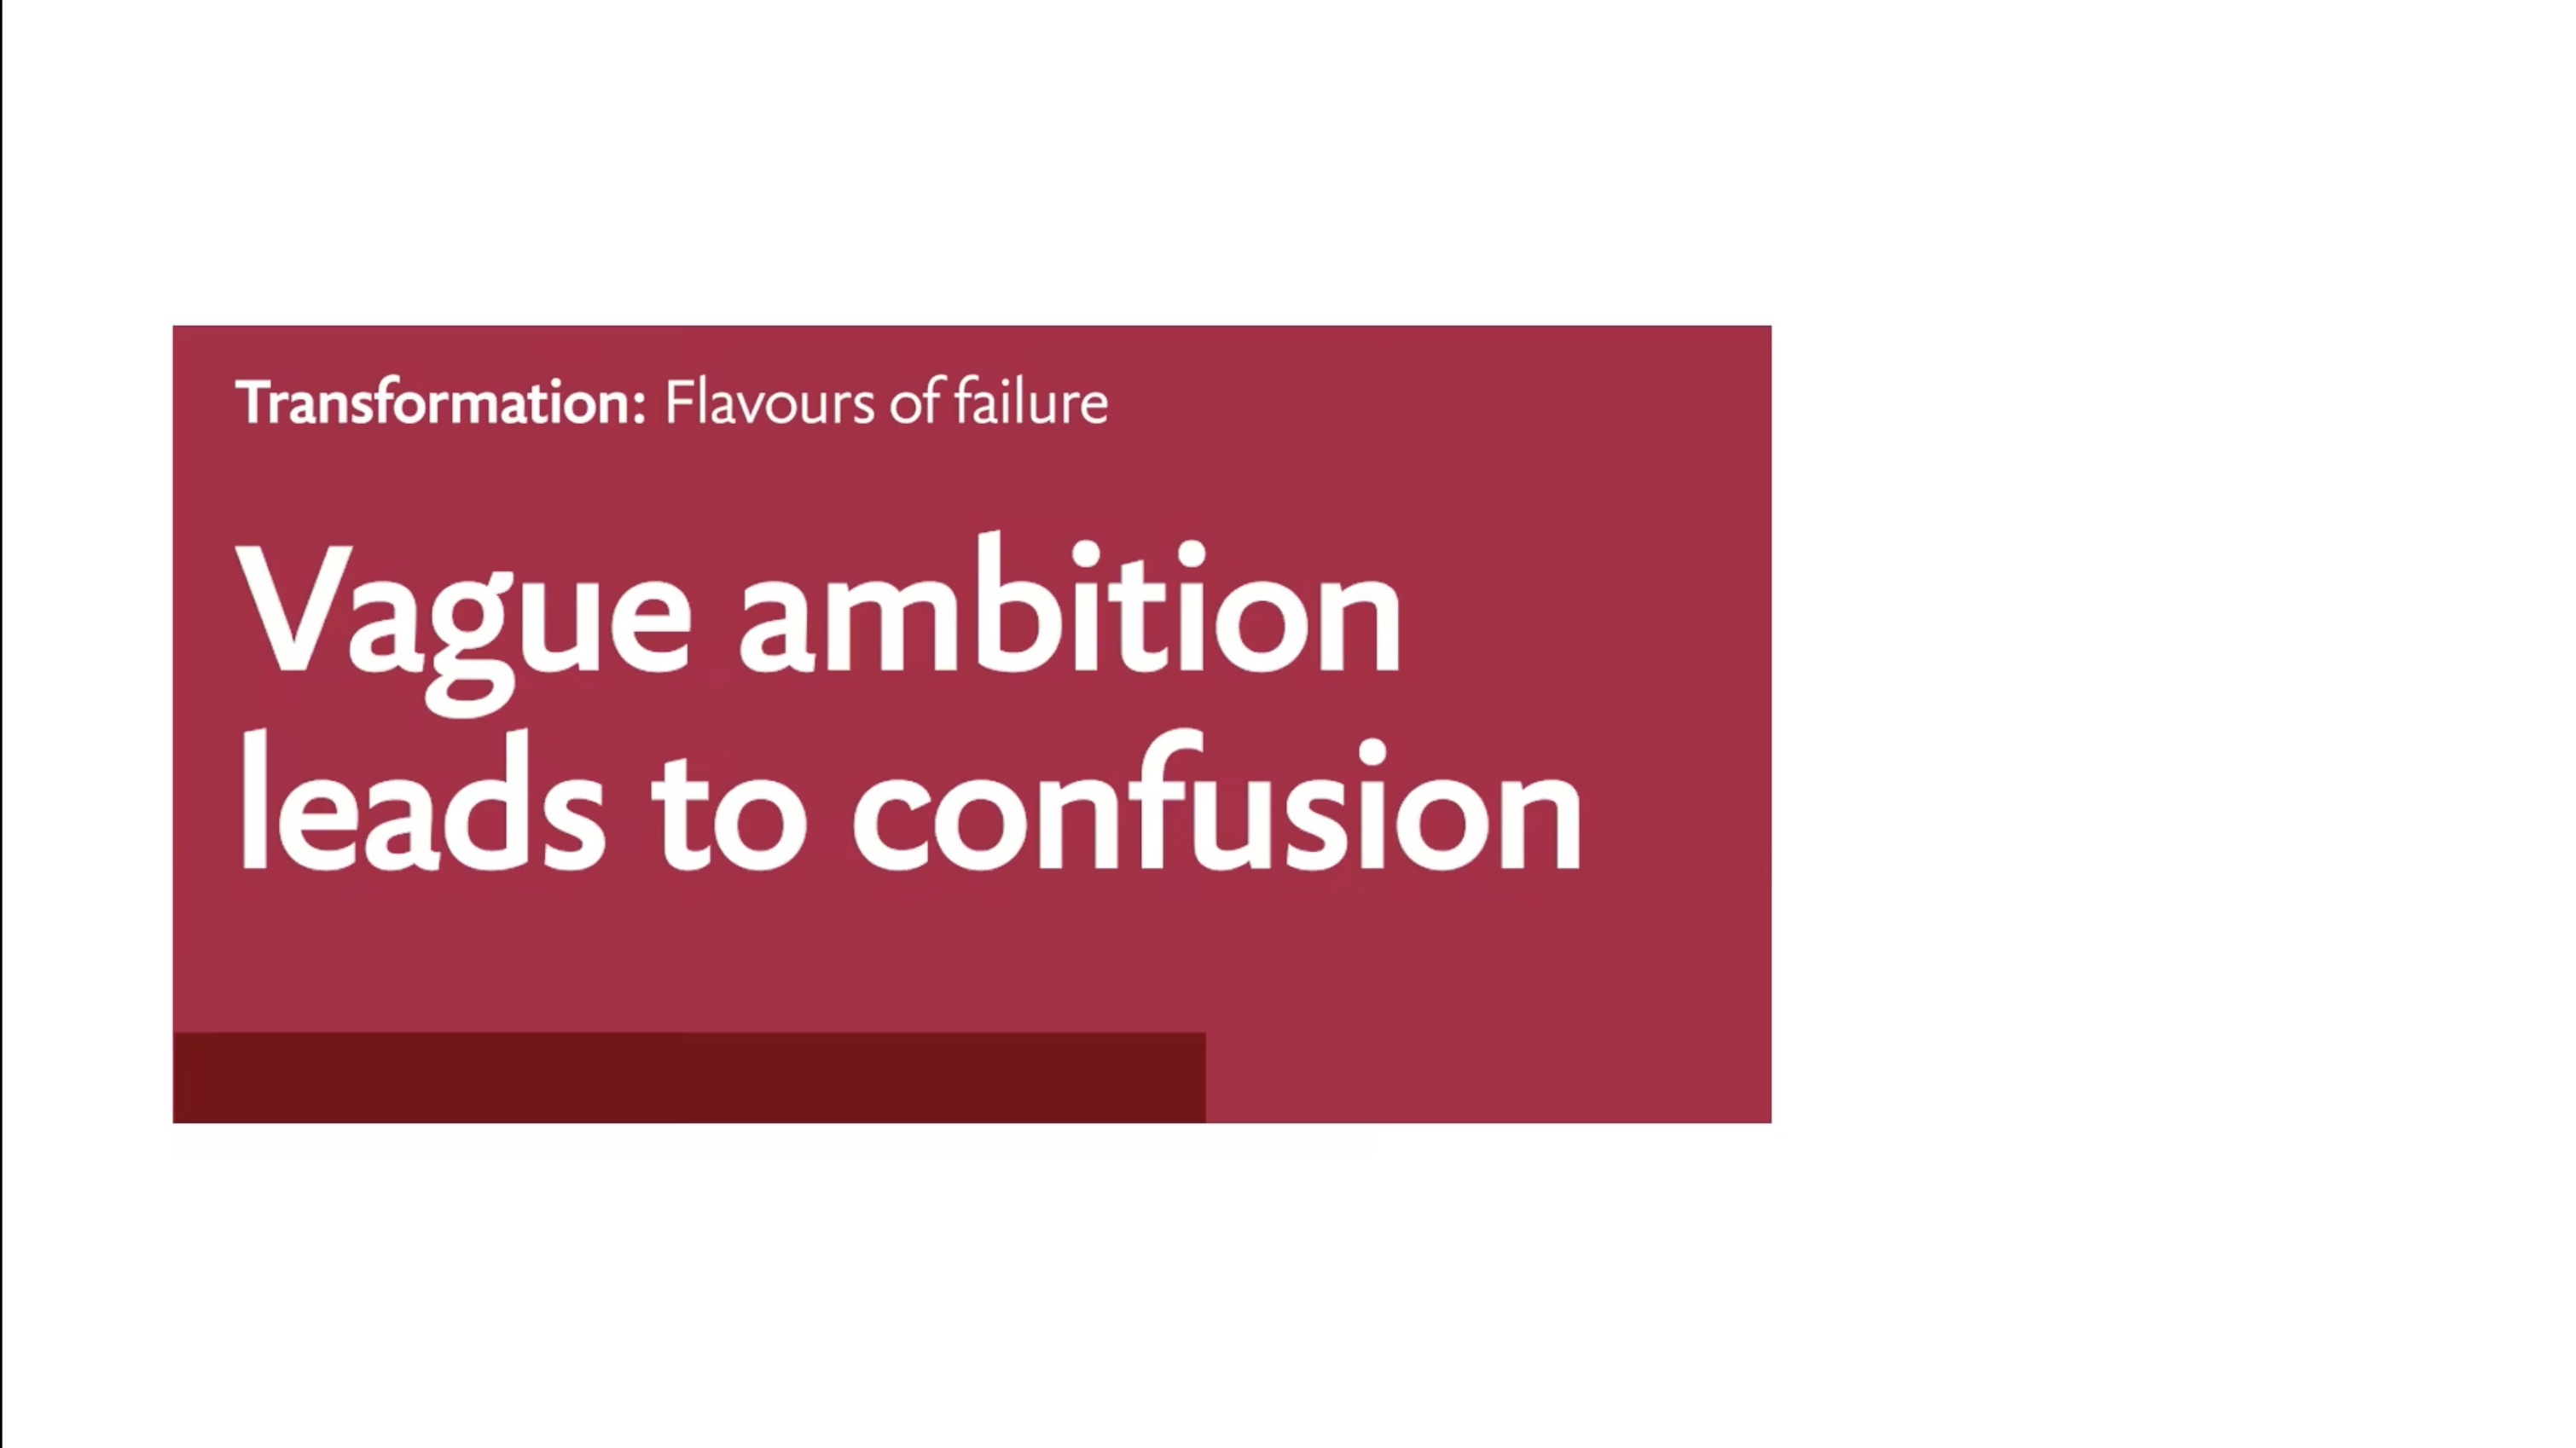 Flavours of failure: Vague ambition leads to confusion